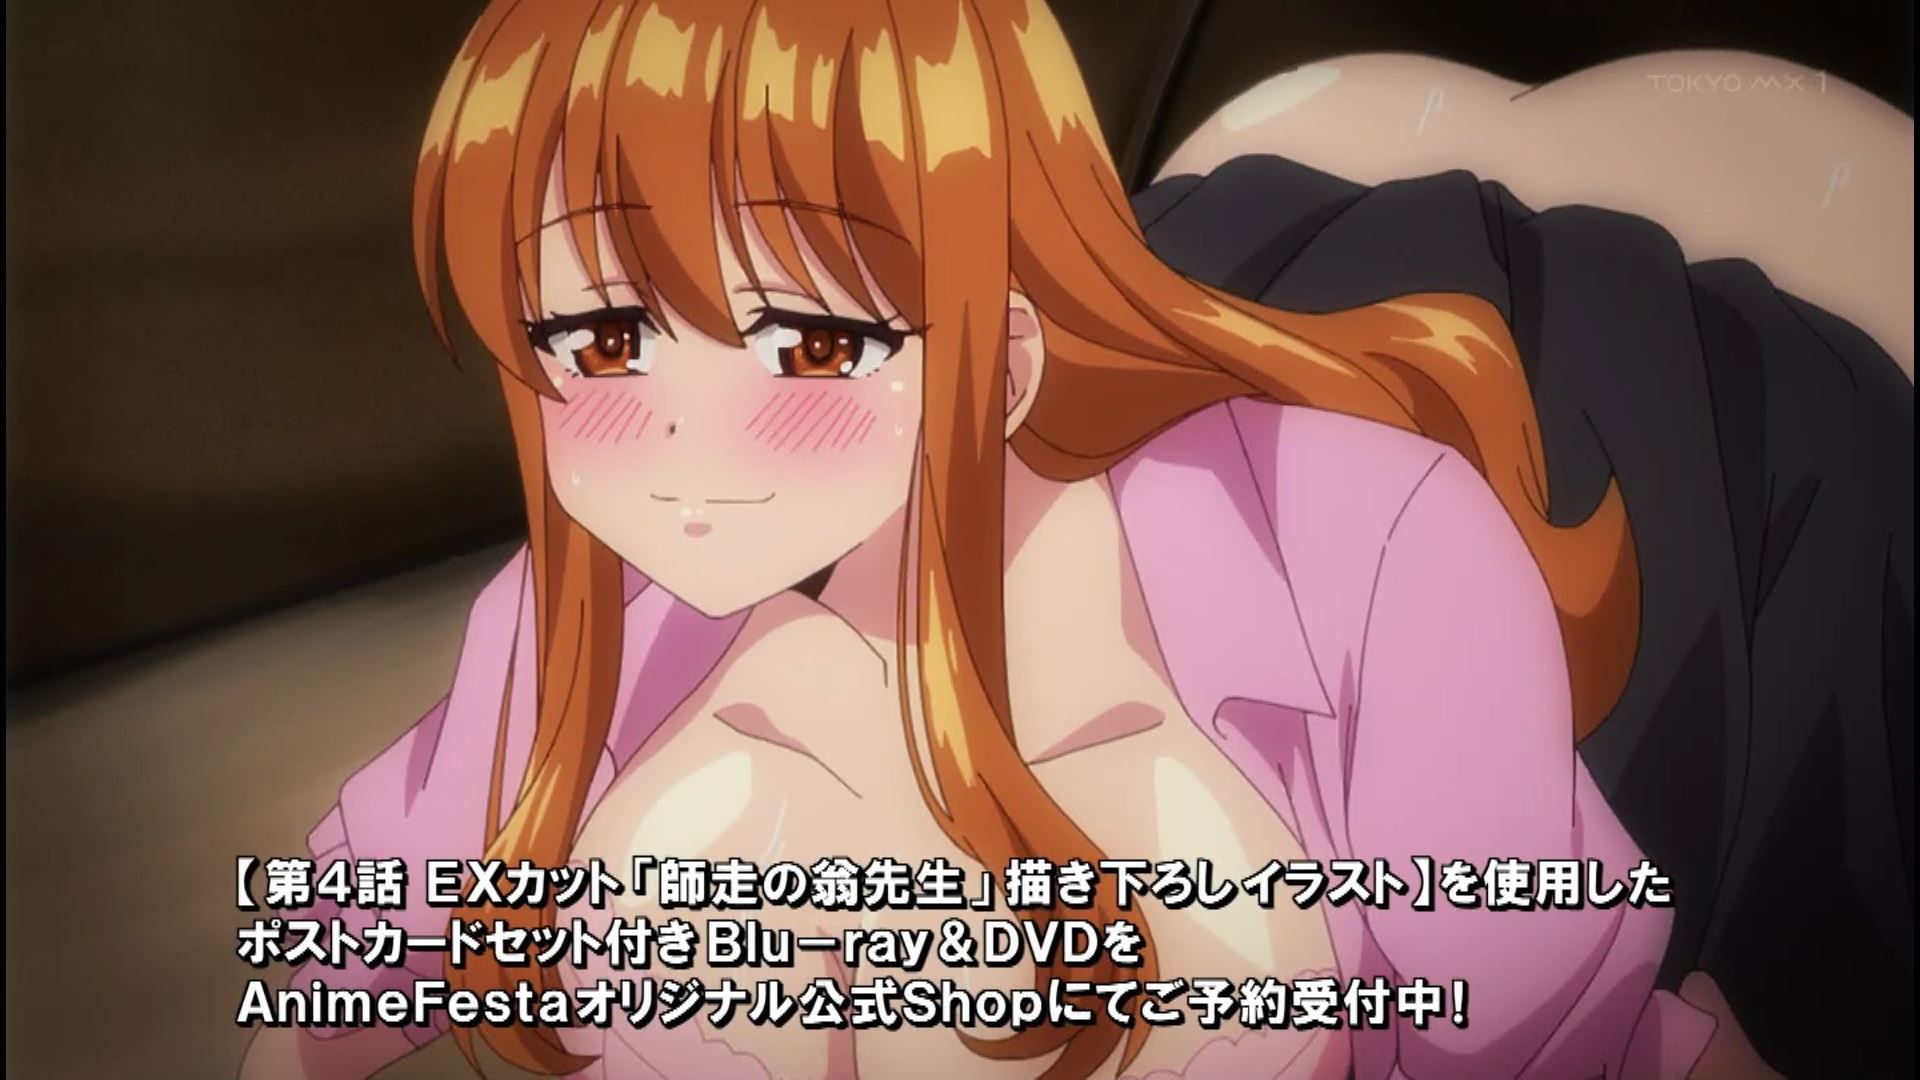 In episode 4 of the anime "Harem Kyampu!", the scene where you have sex with a girl in a tent normally! 12